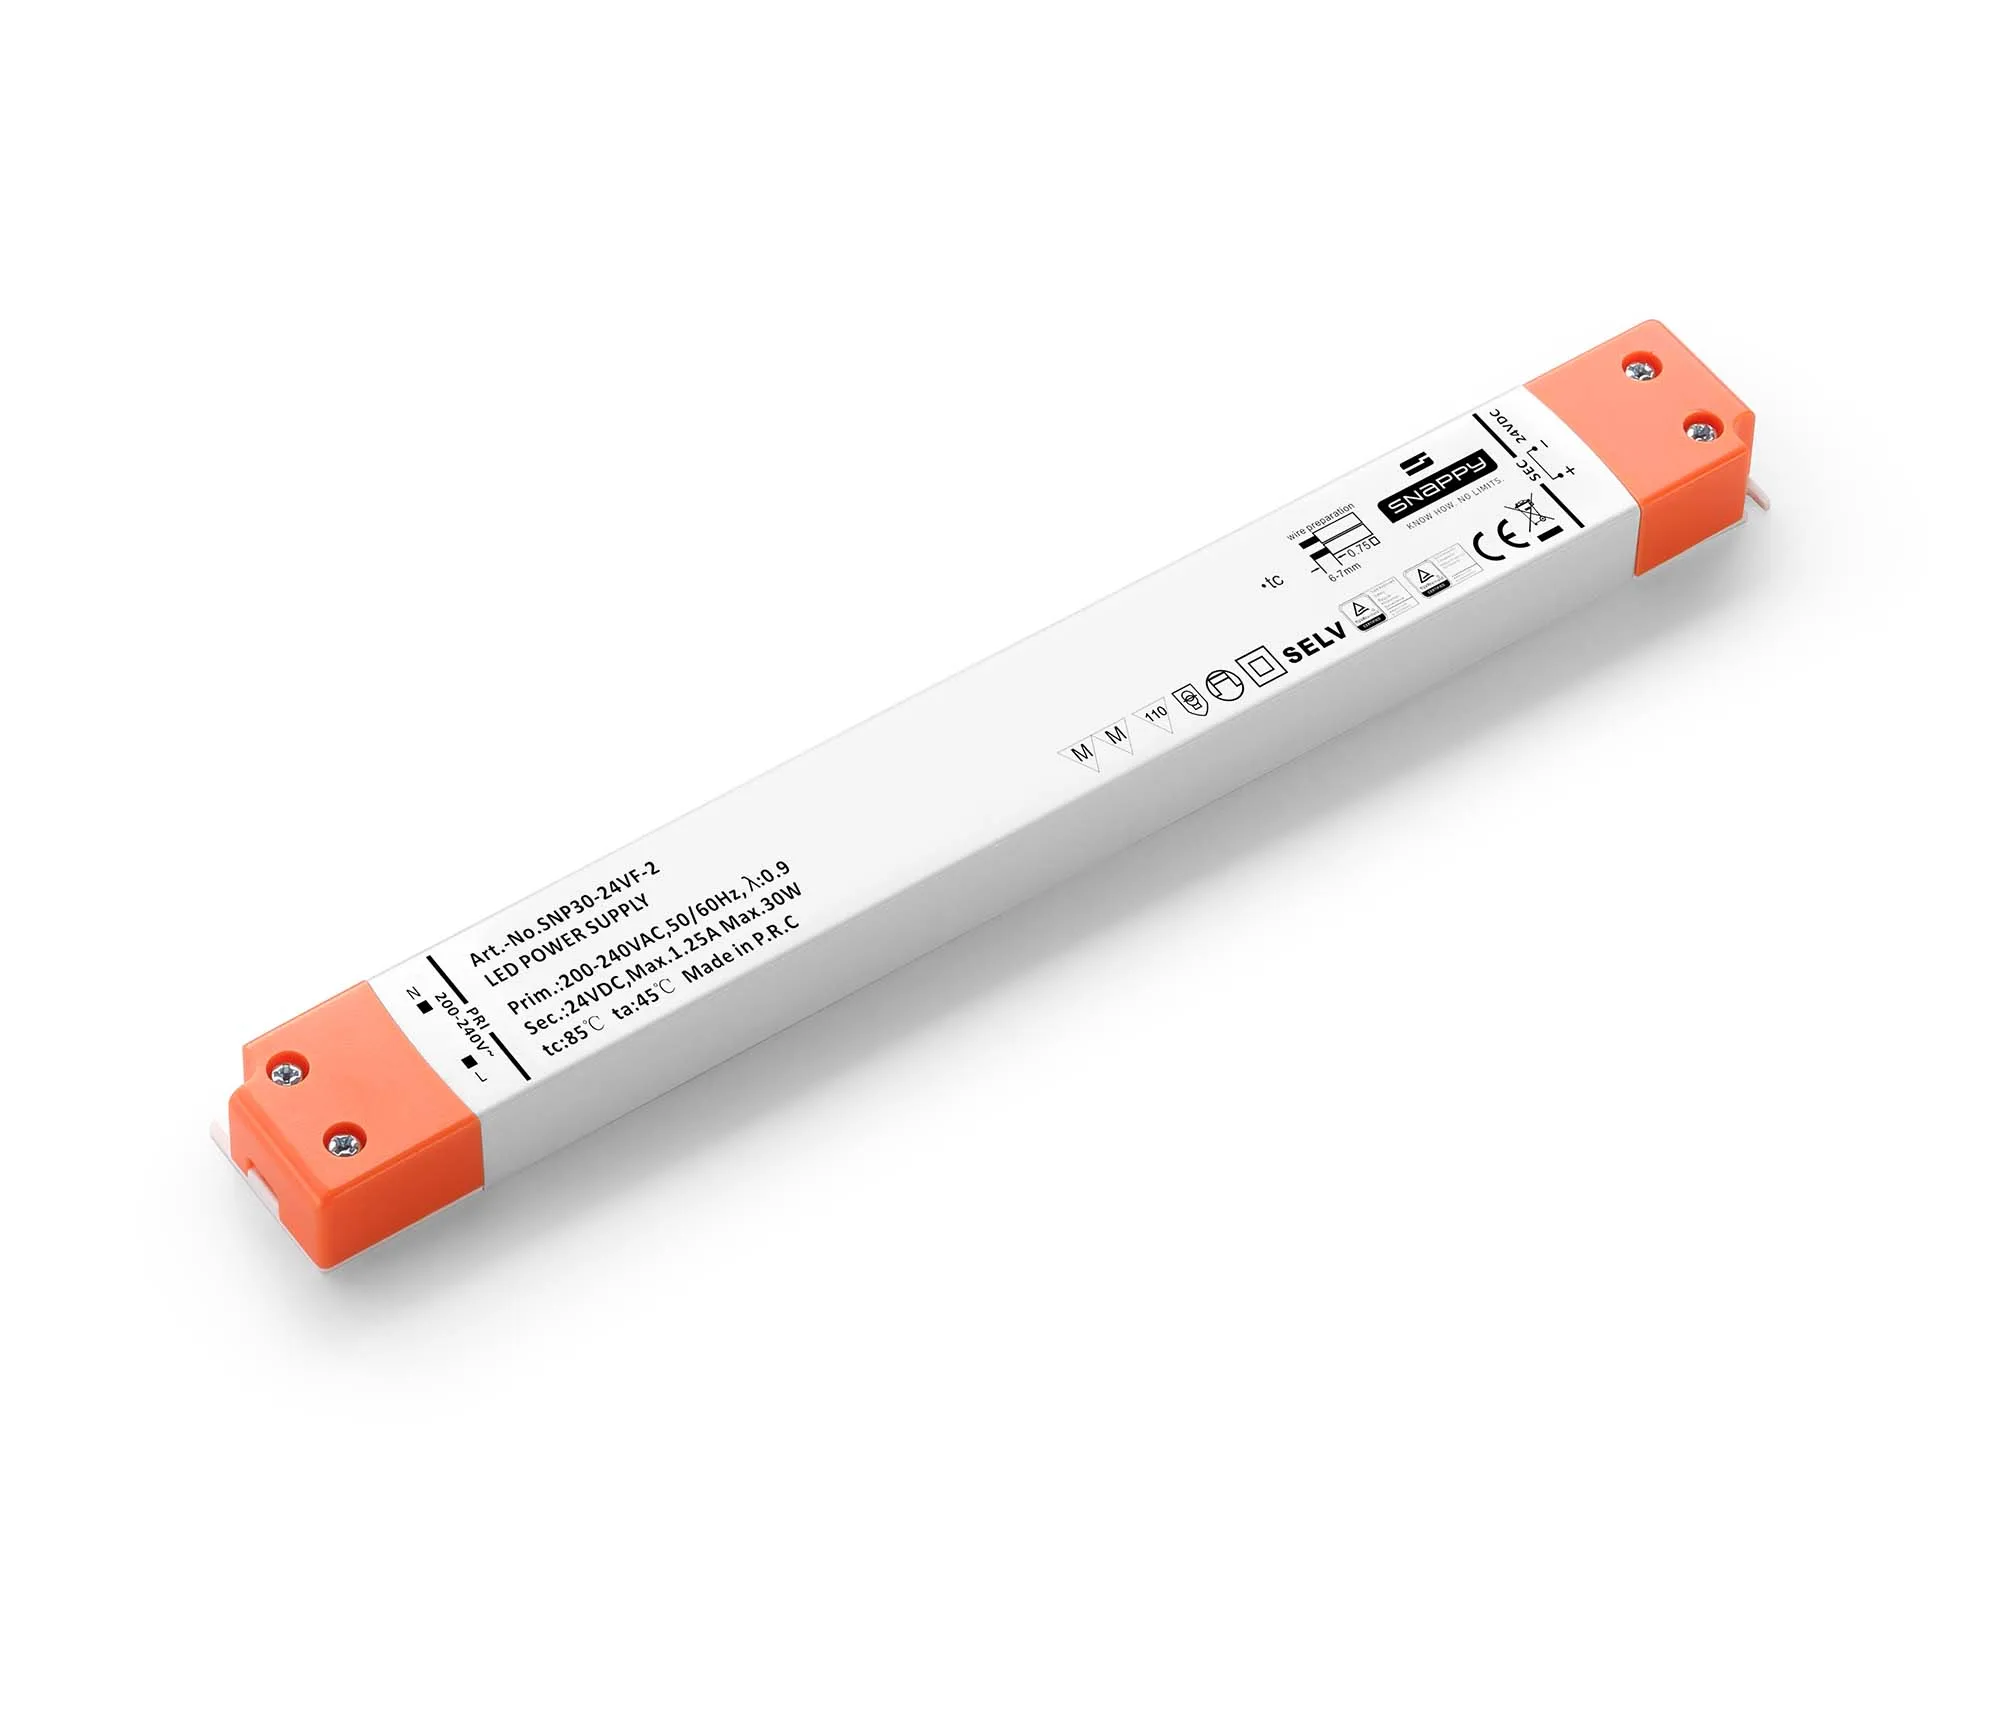 SNP30-12VF-2  Input 200-240VAC 30W 12V24V linetype constant voltage SNAPPY AC DC LED Driver for advertising, light boxes